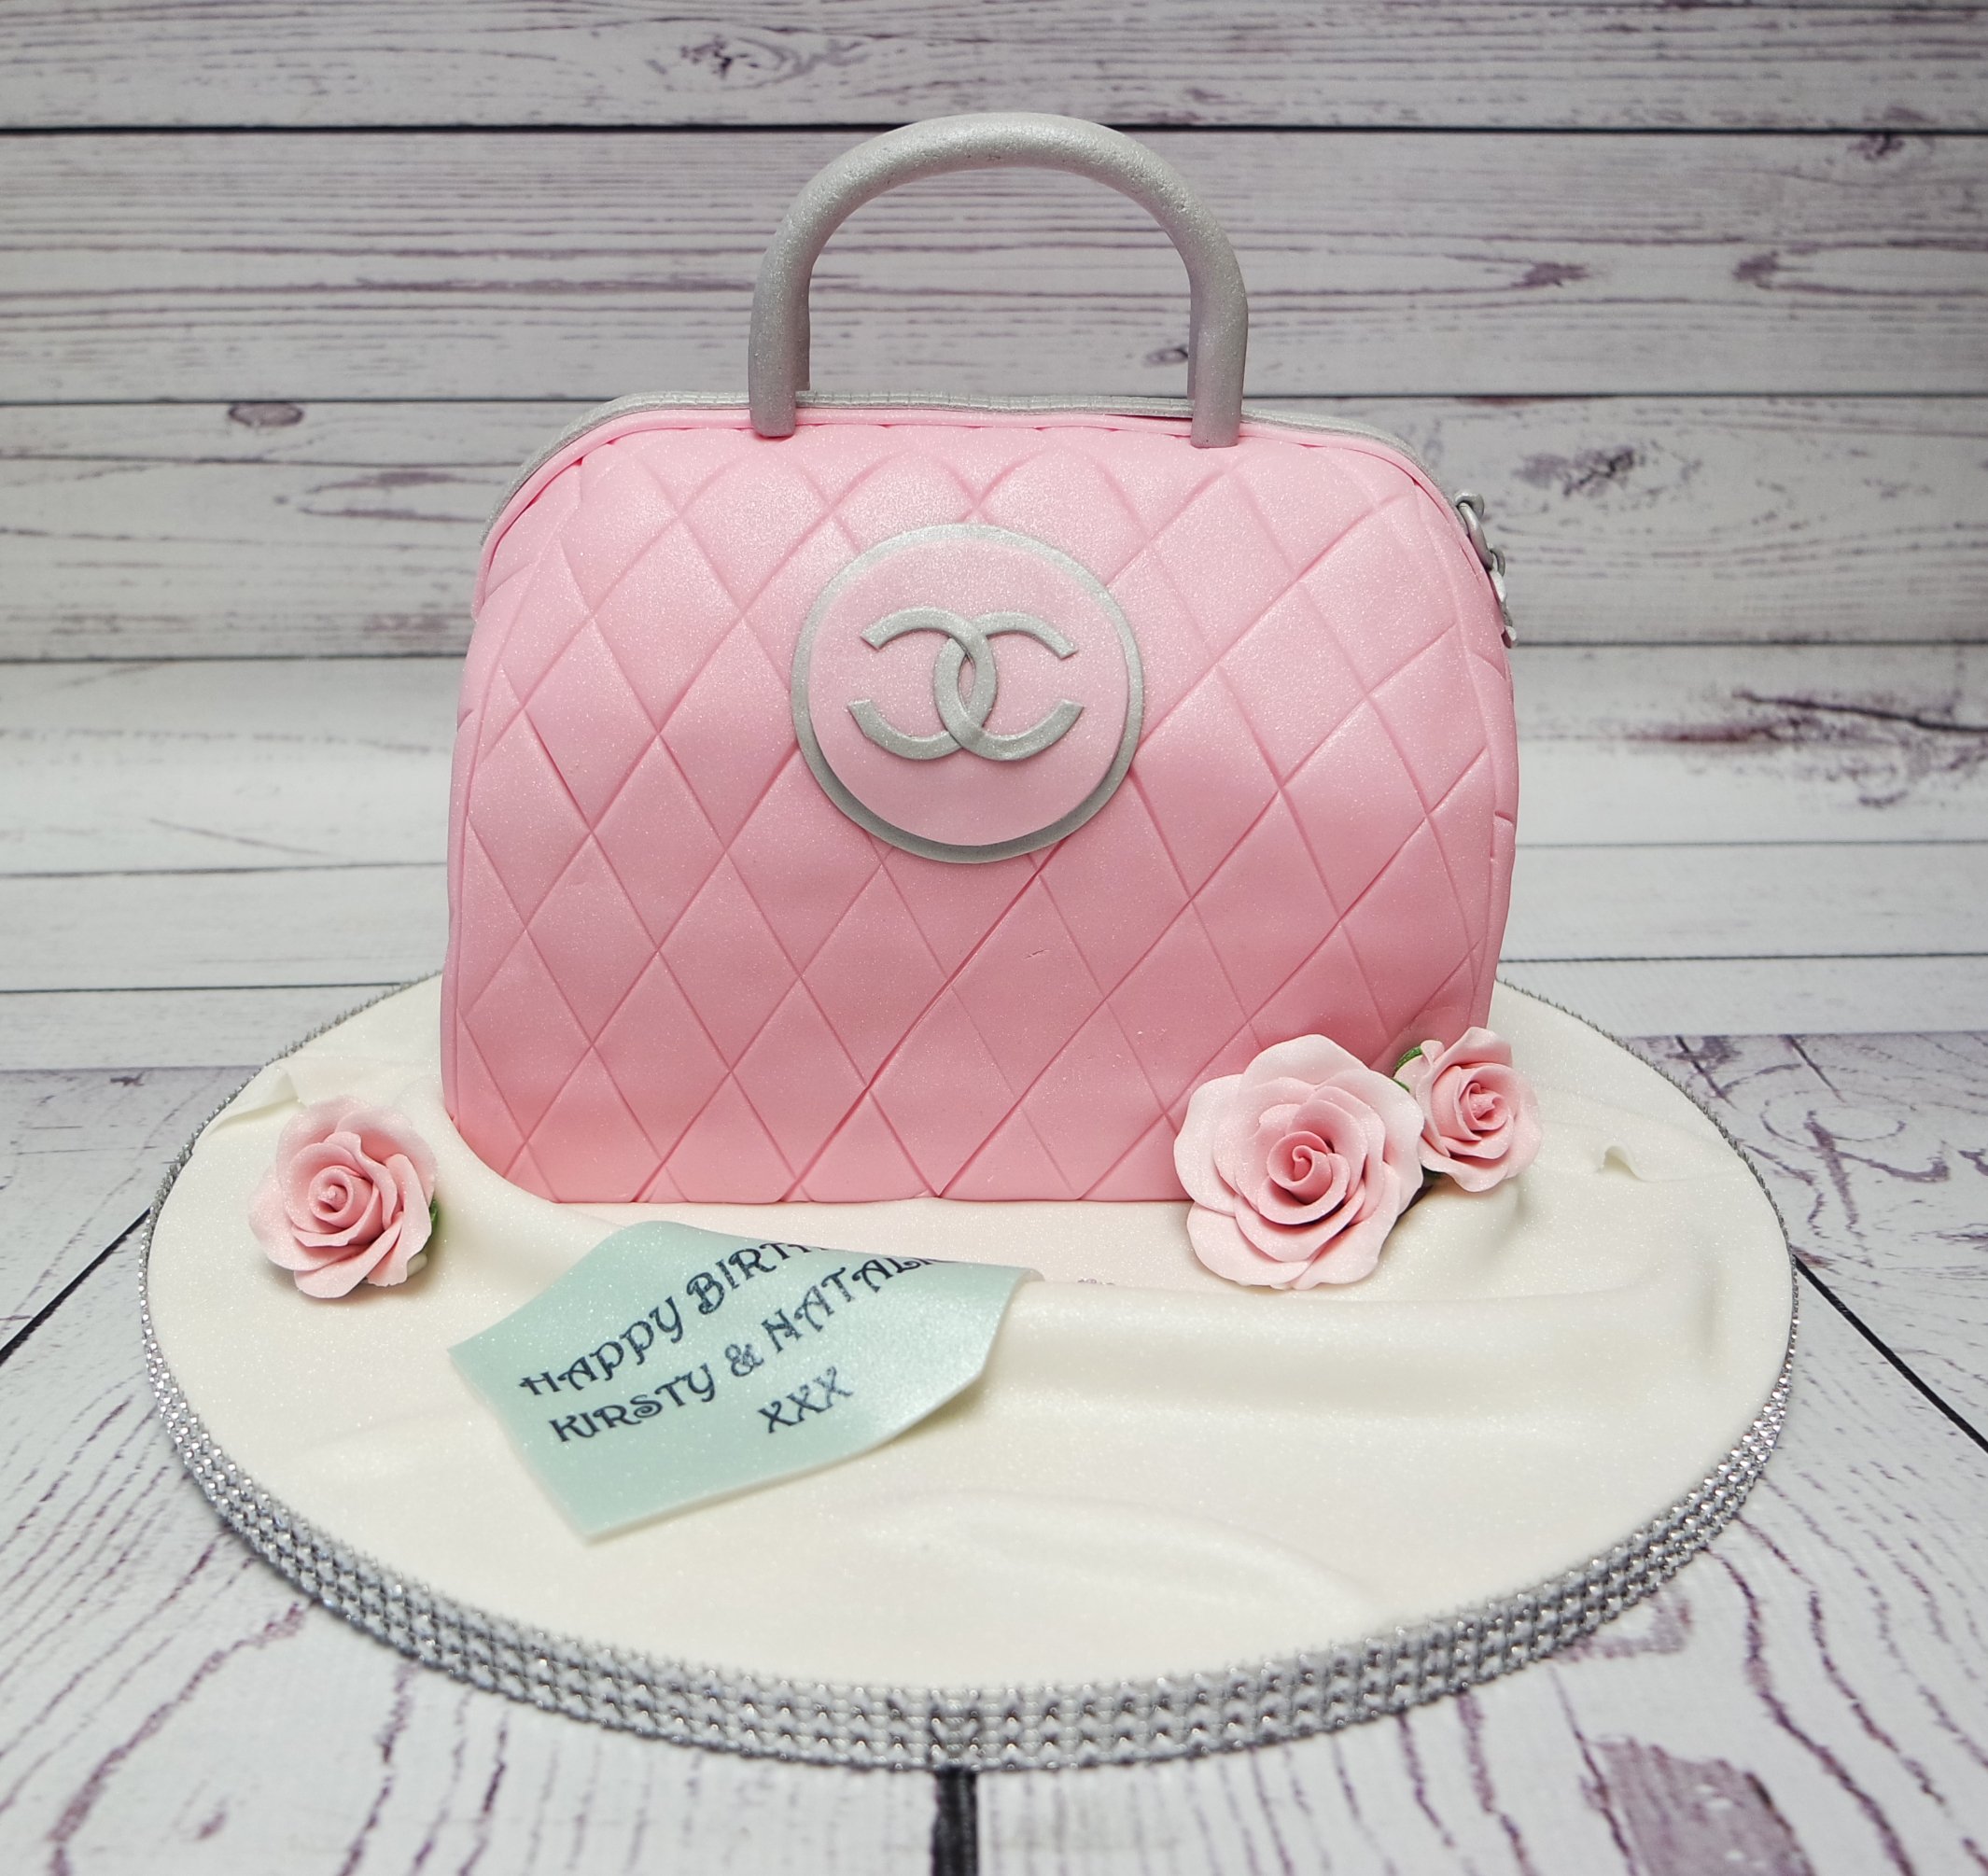 Crafty Cakes on X: A pretty Channel handbag cake for a special birthday 👜  We hope you had a lovely time celebrating! #bespokecakeexeter #birthdaycake  #birthdaycakeexeter #channelhandbagcake #channelhandbag #handbagcake   / X